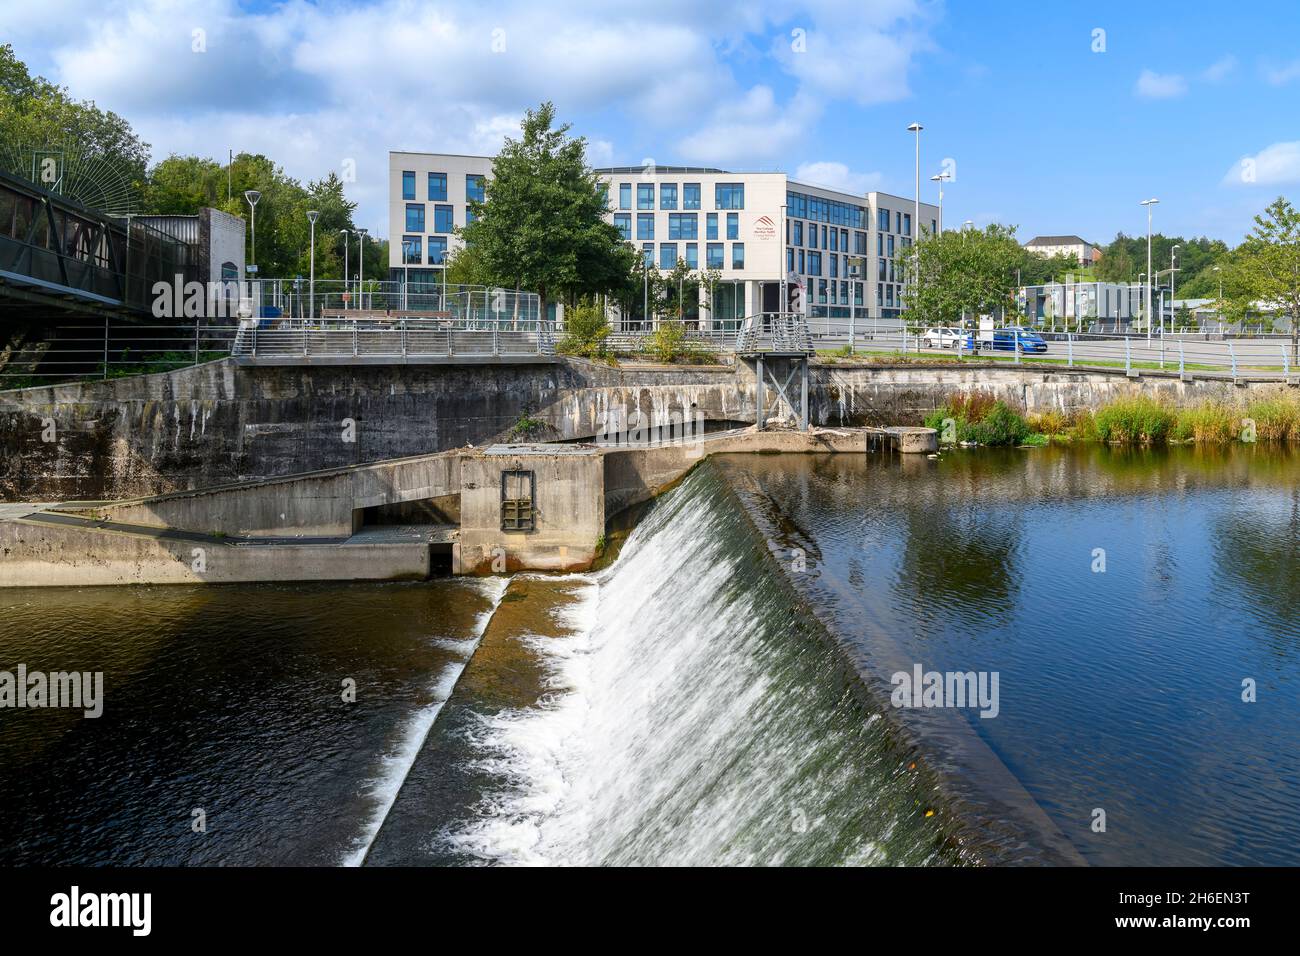 Merthyr Tydfil College on the banks of the River Taff in Wales. The college teaches further education offering over 100 courses. Stock Photo